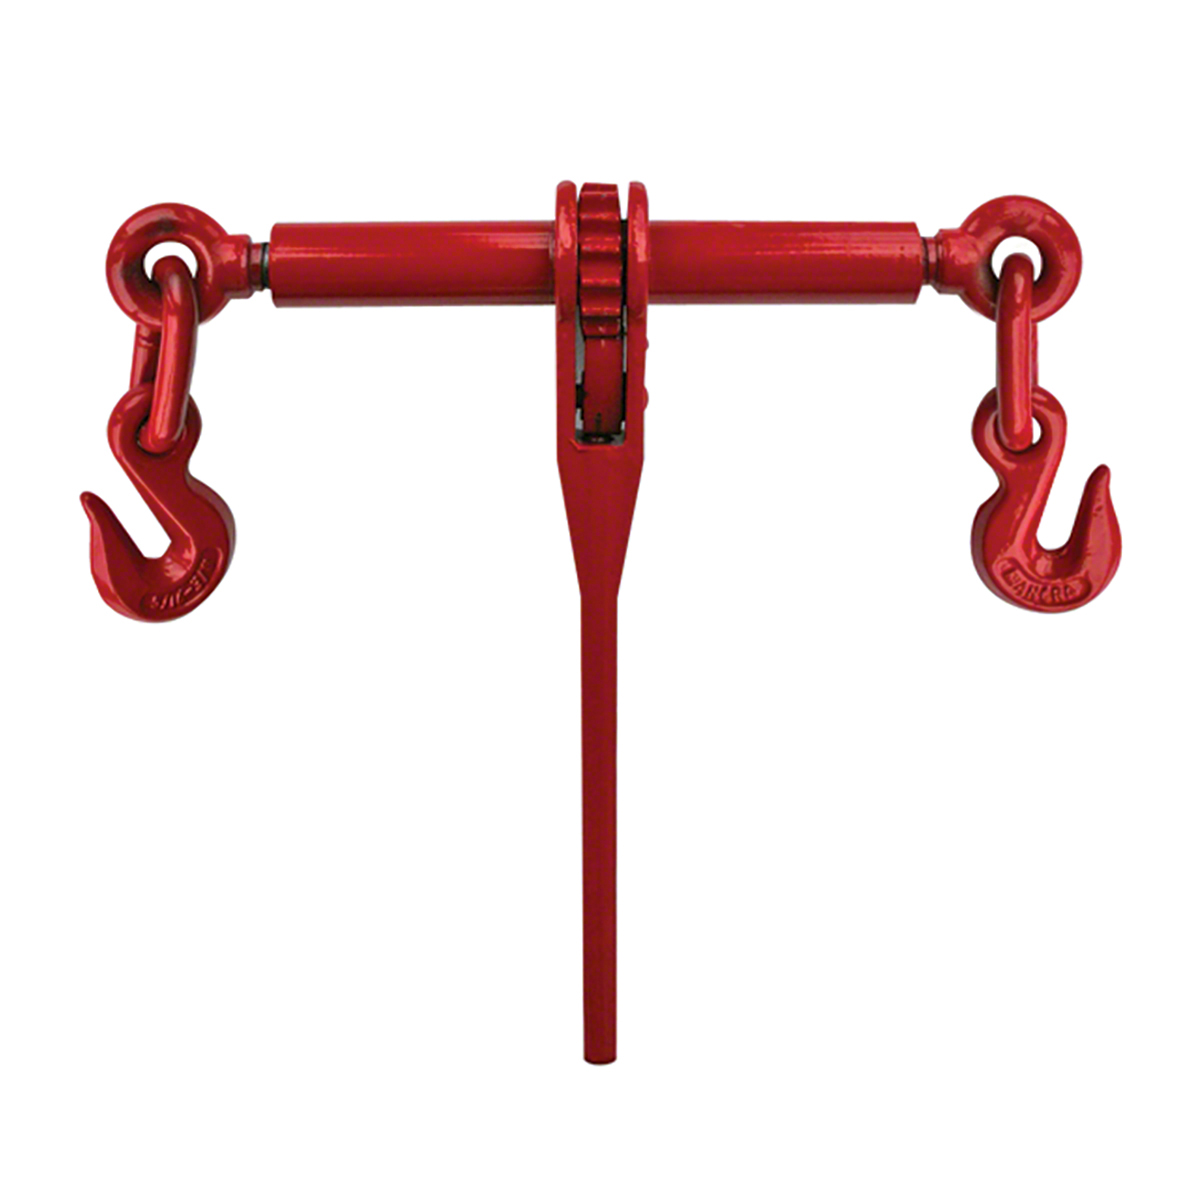 to 3/8in Chains Capacity Model# DDT-1 8800-Lb TruckTight Ratchet Load Binder Fits 5/16in